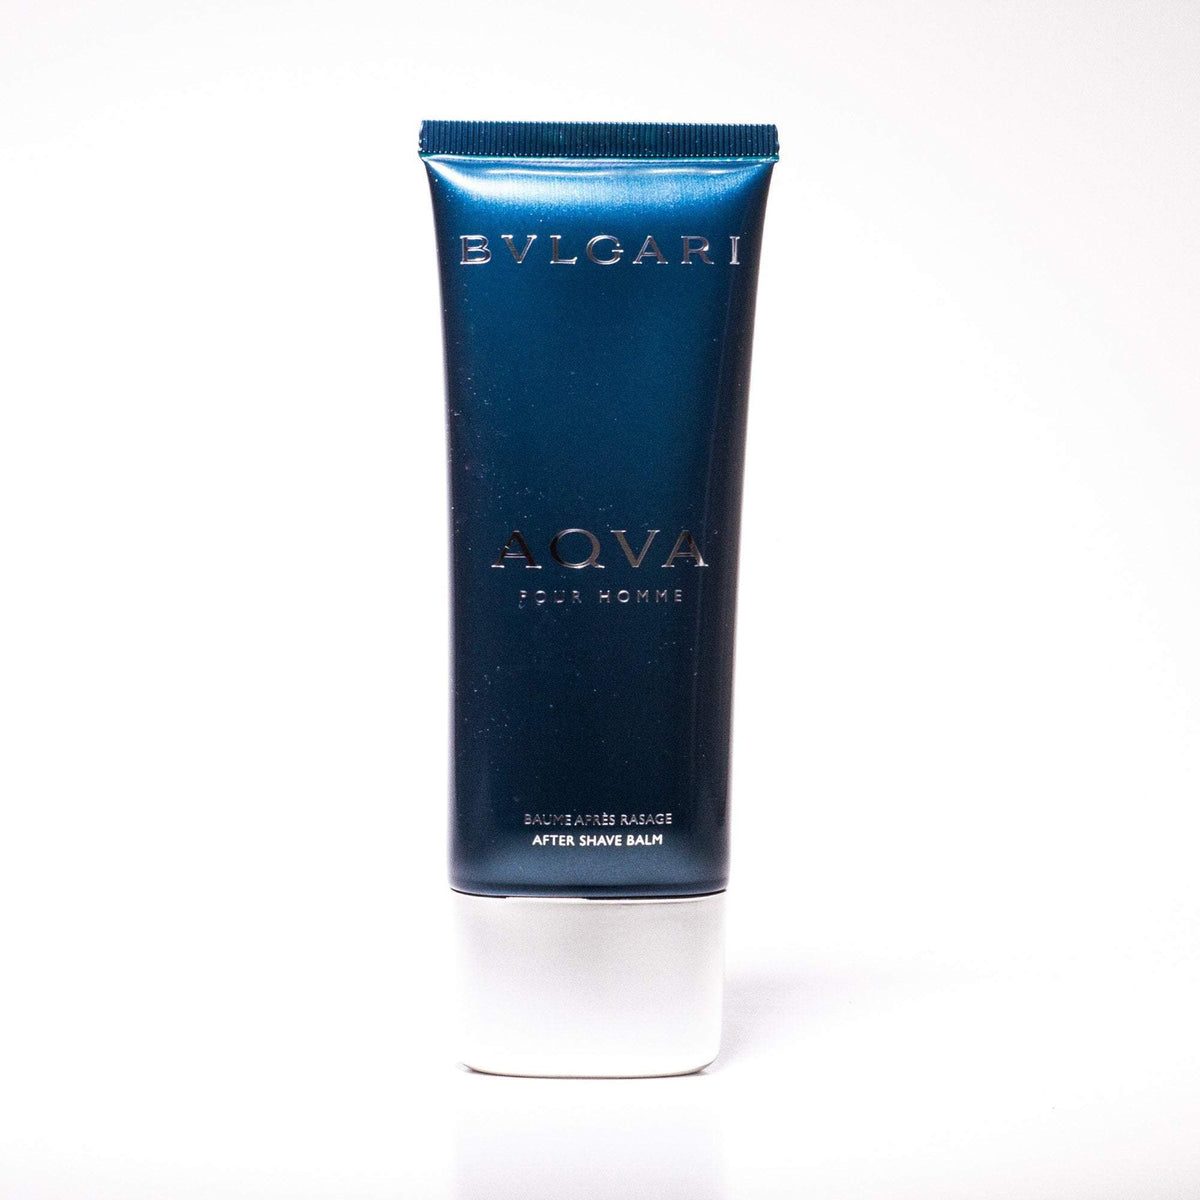 Aqva After Shave Balm for Men by Bvlgari